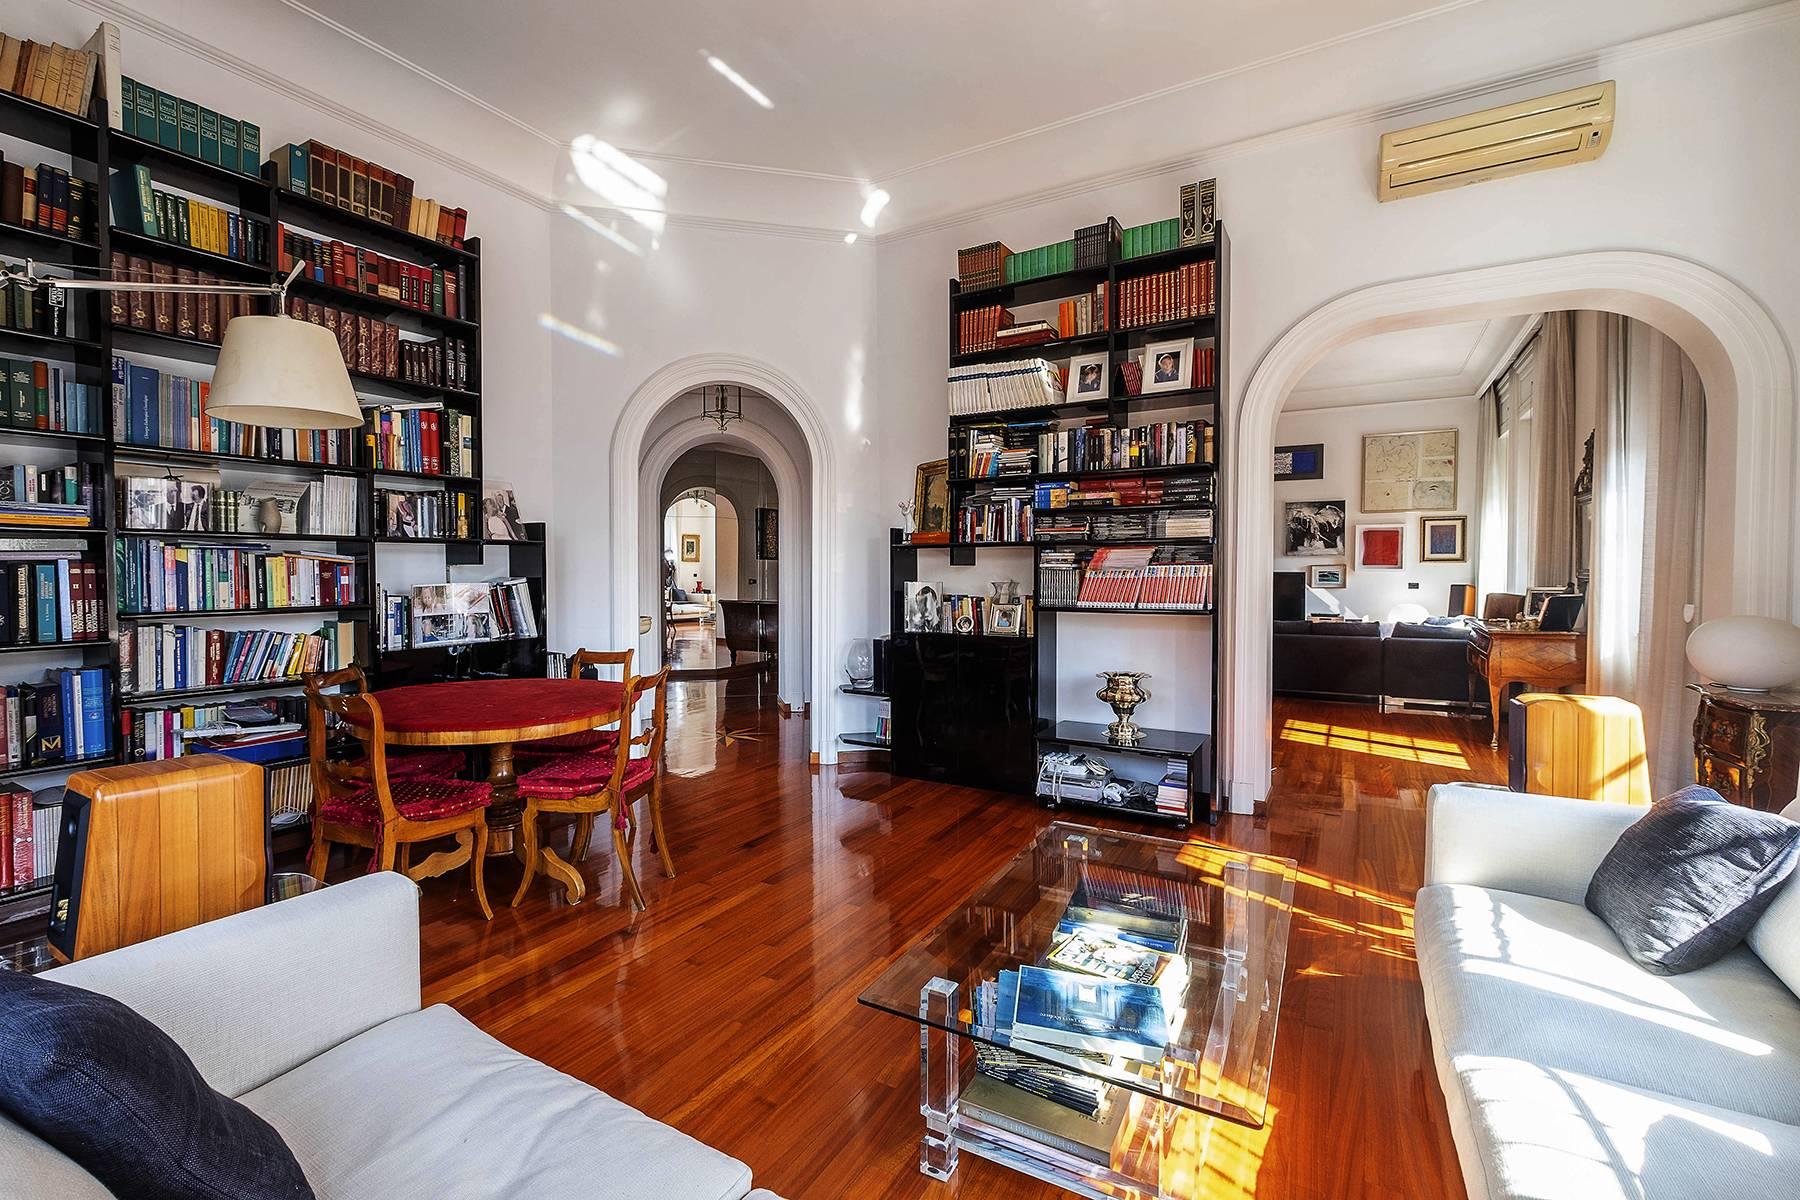 Superb penthouse located in an elegant Coppedè-style building - 8